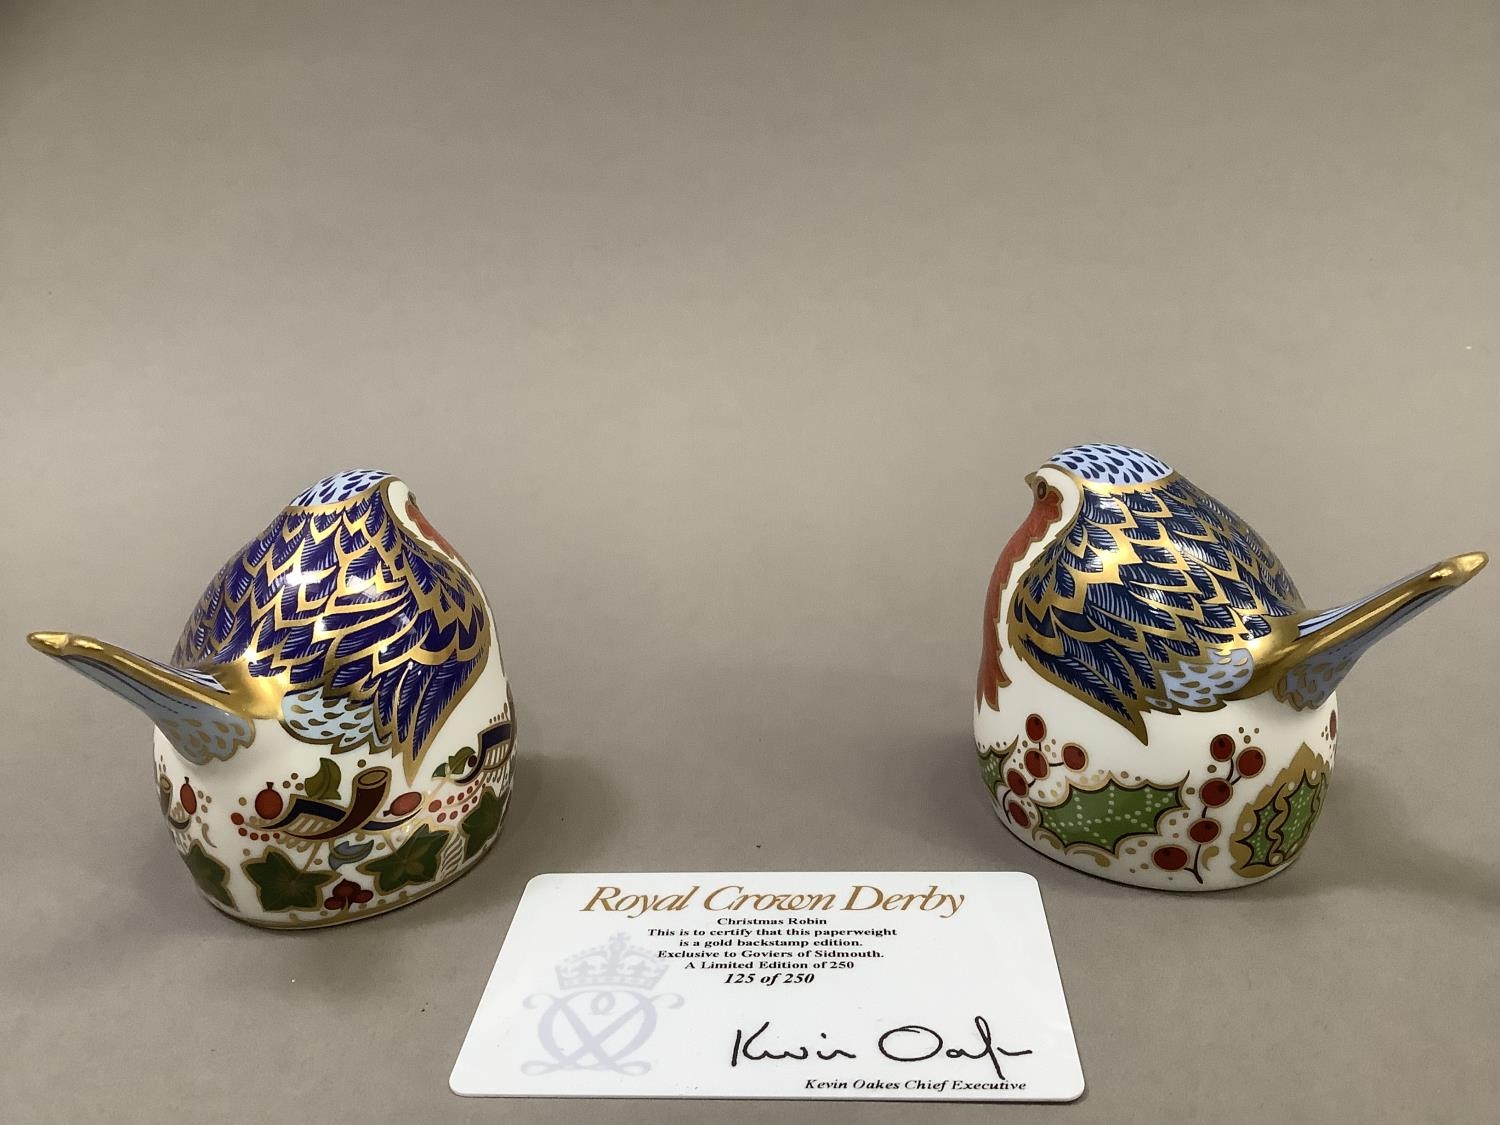 Two Royal Crown Derby Christmas robins, one a pre-release edition of 250 exclusive to Goviers of - Image 3 of 5